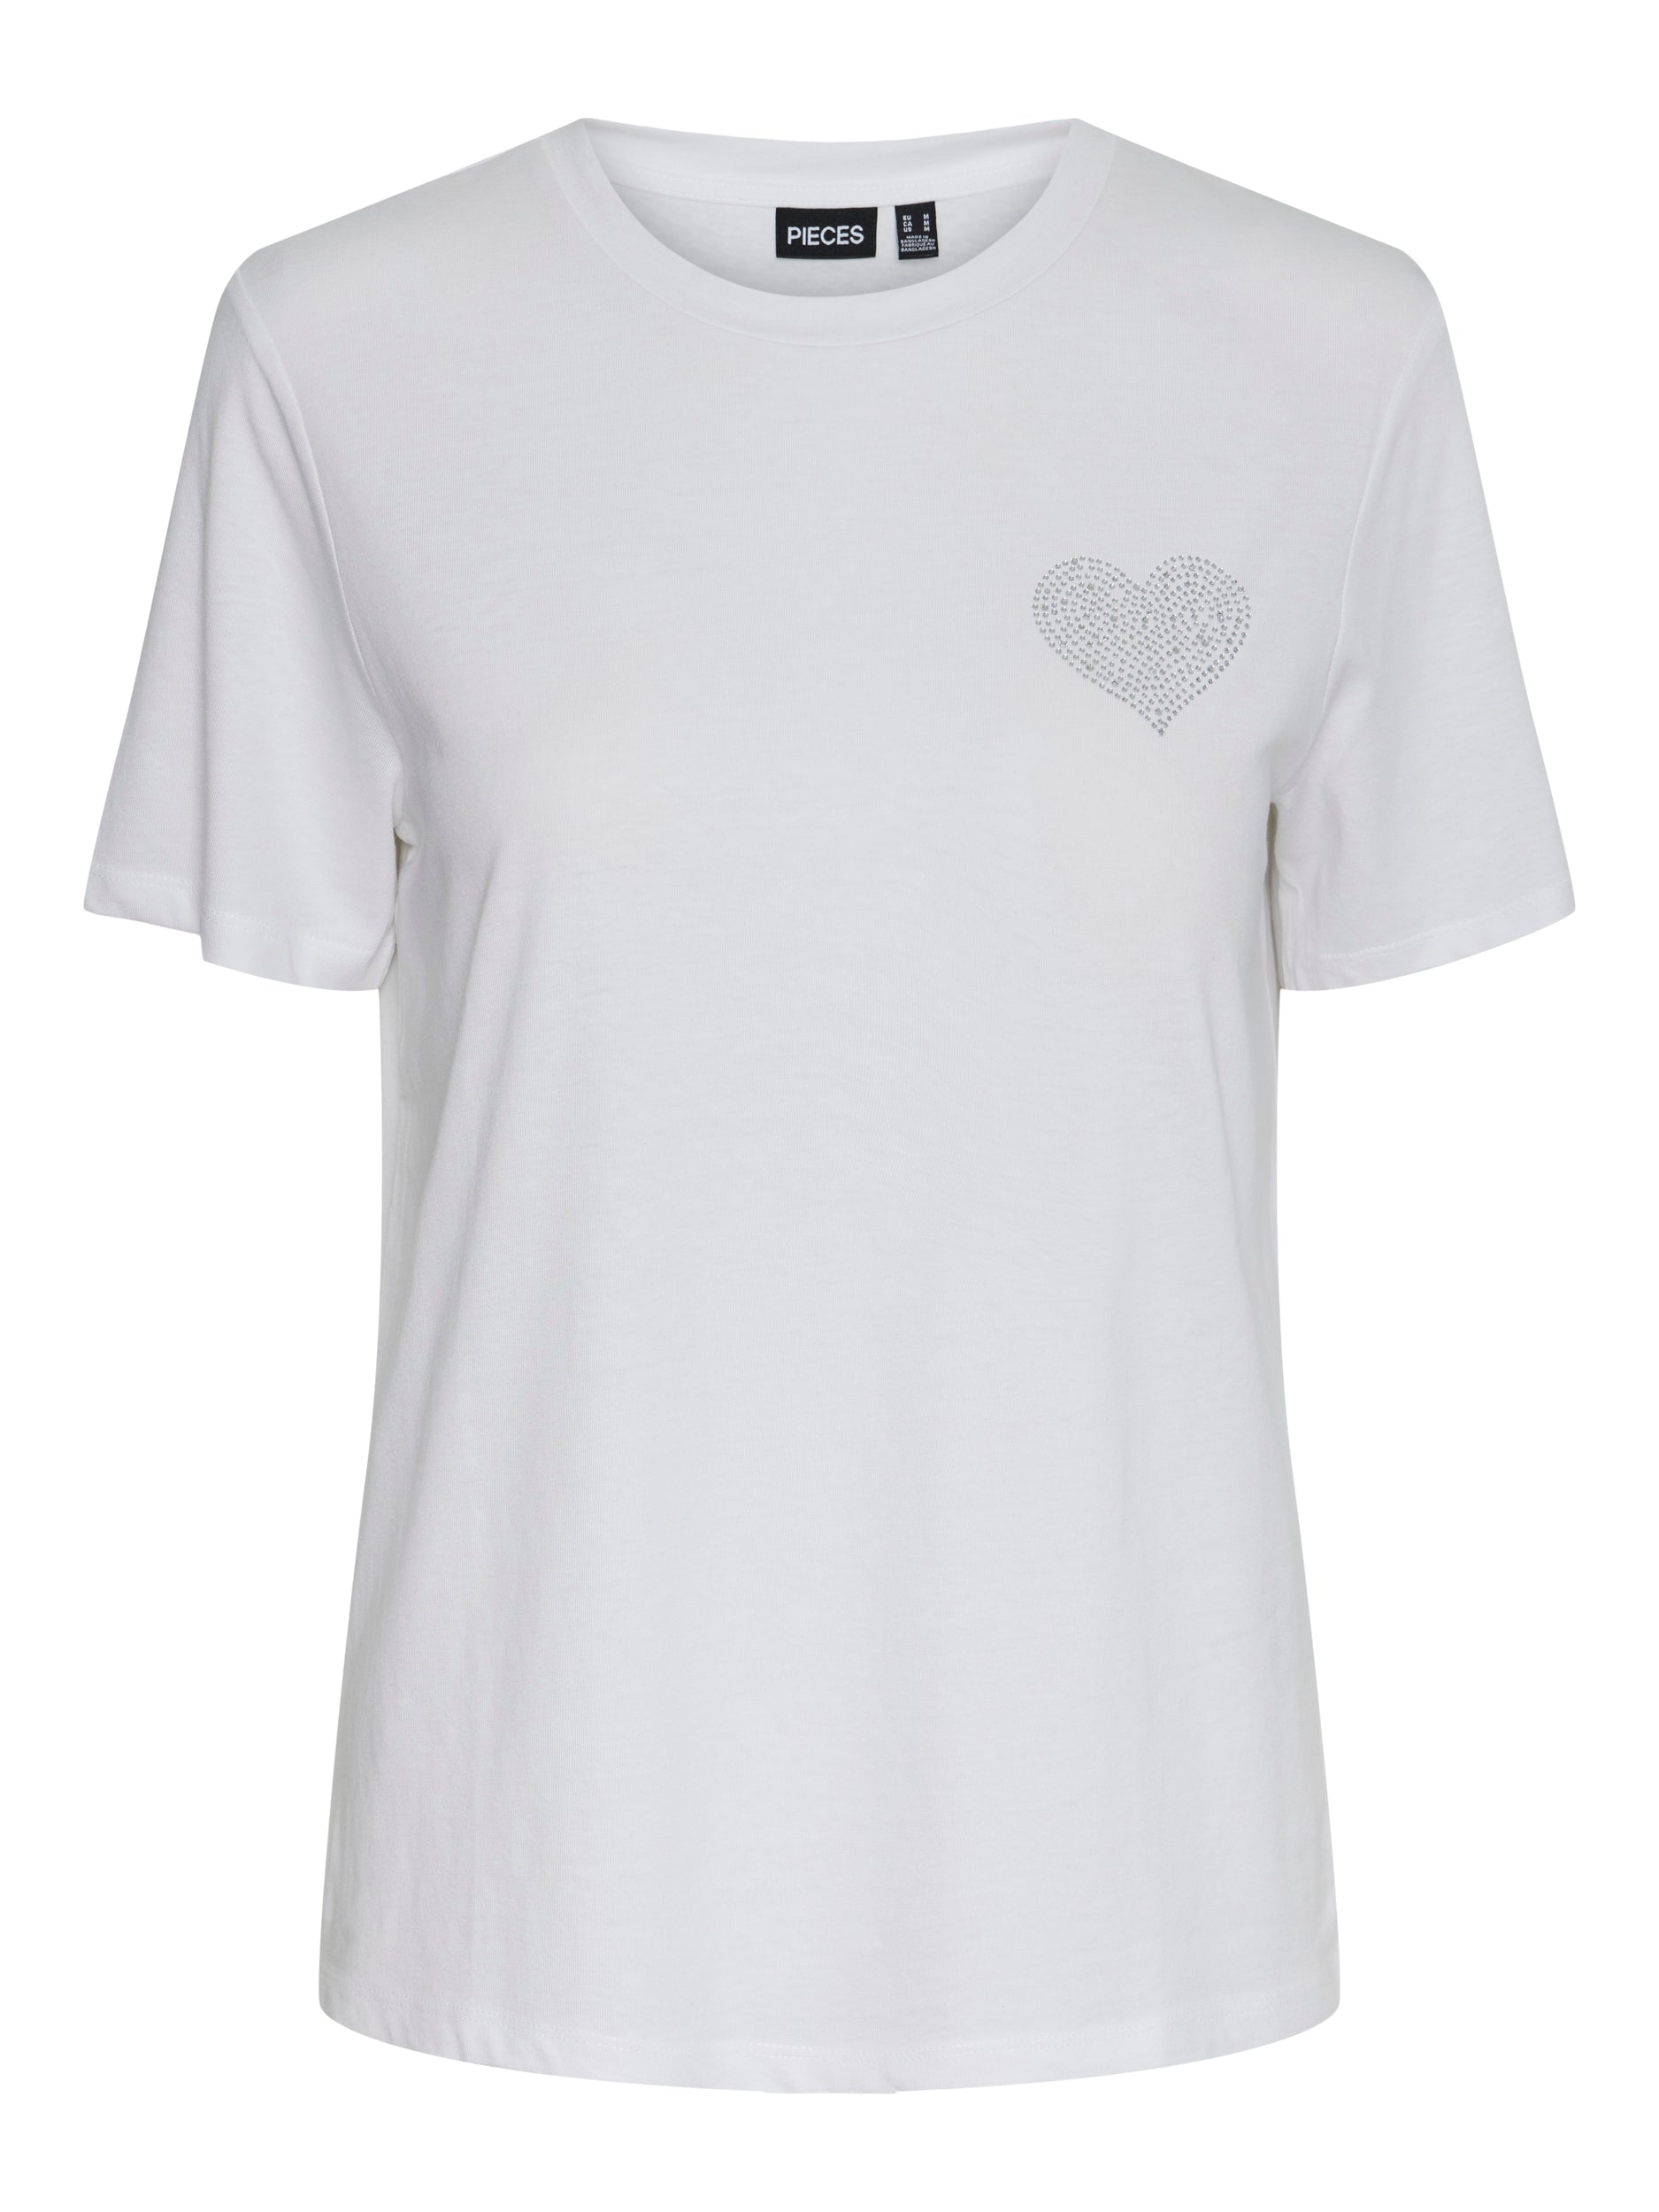 Pieces t-shirt bianco stampa cuore con strass